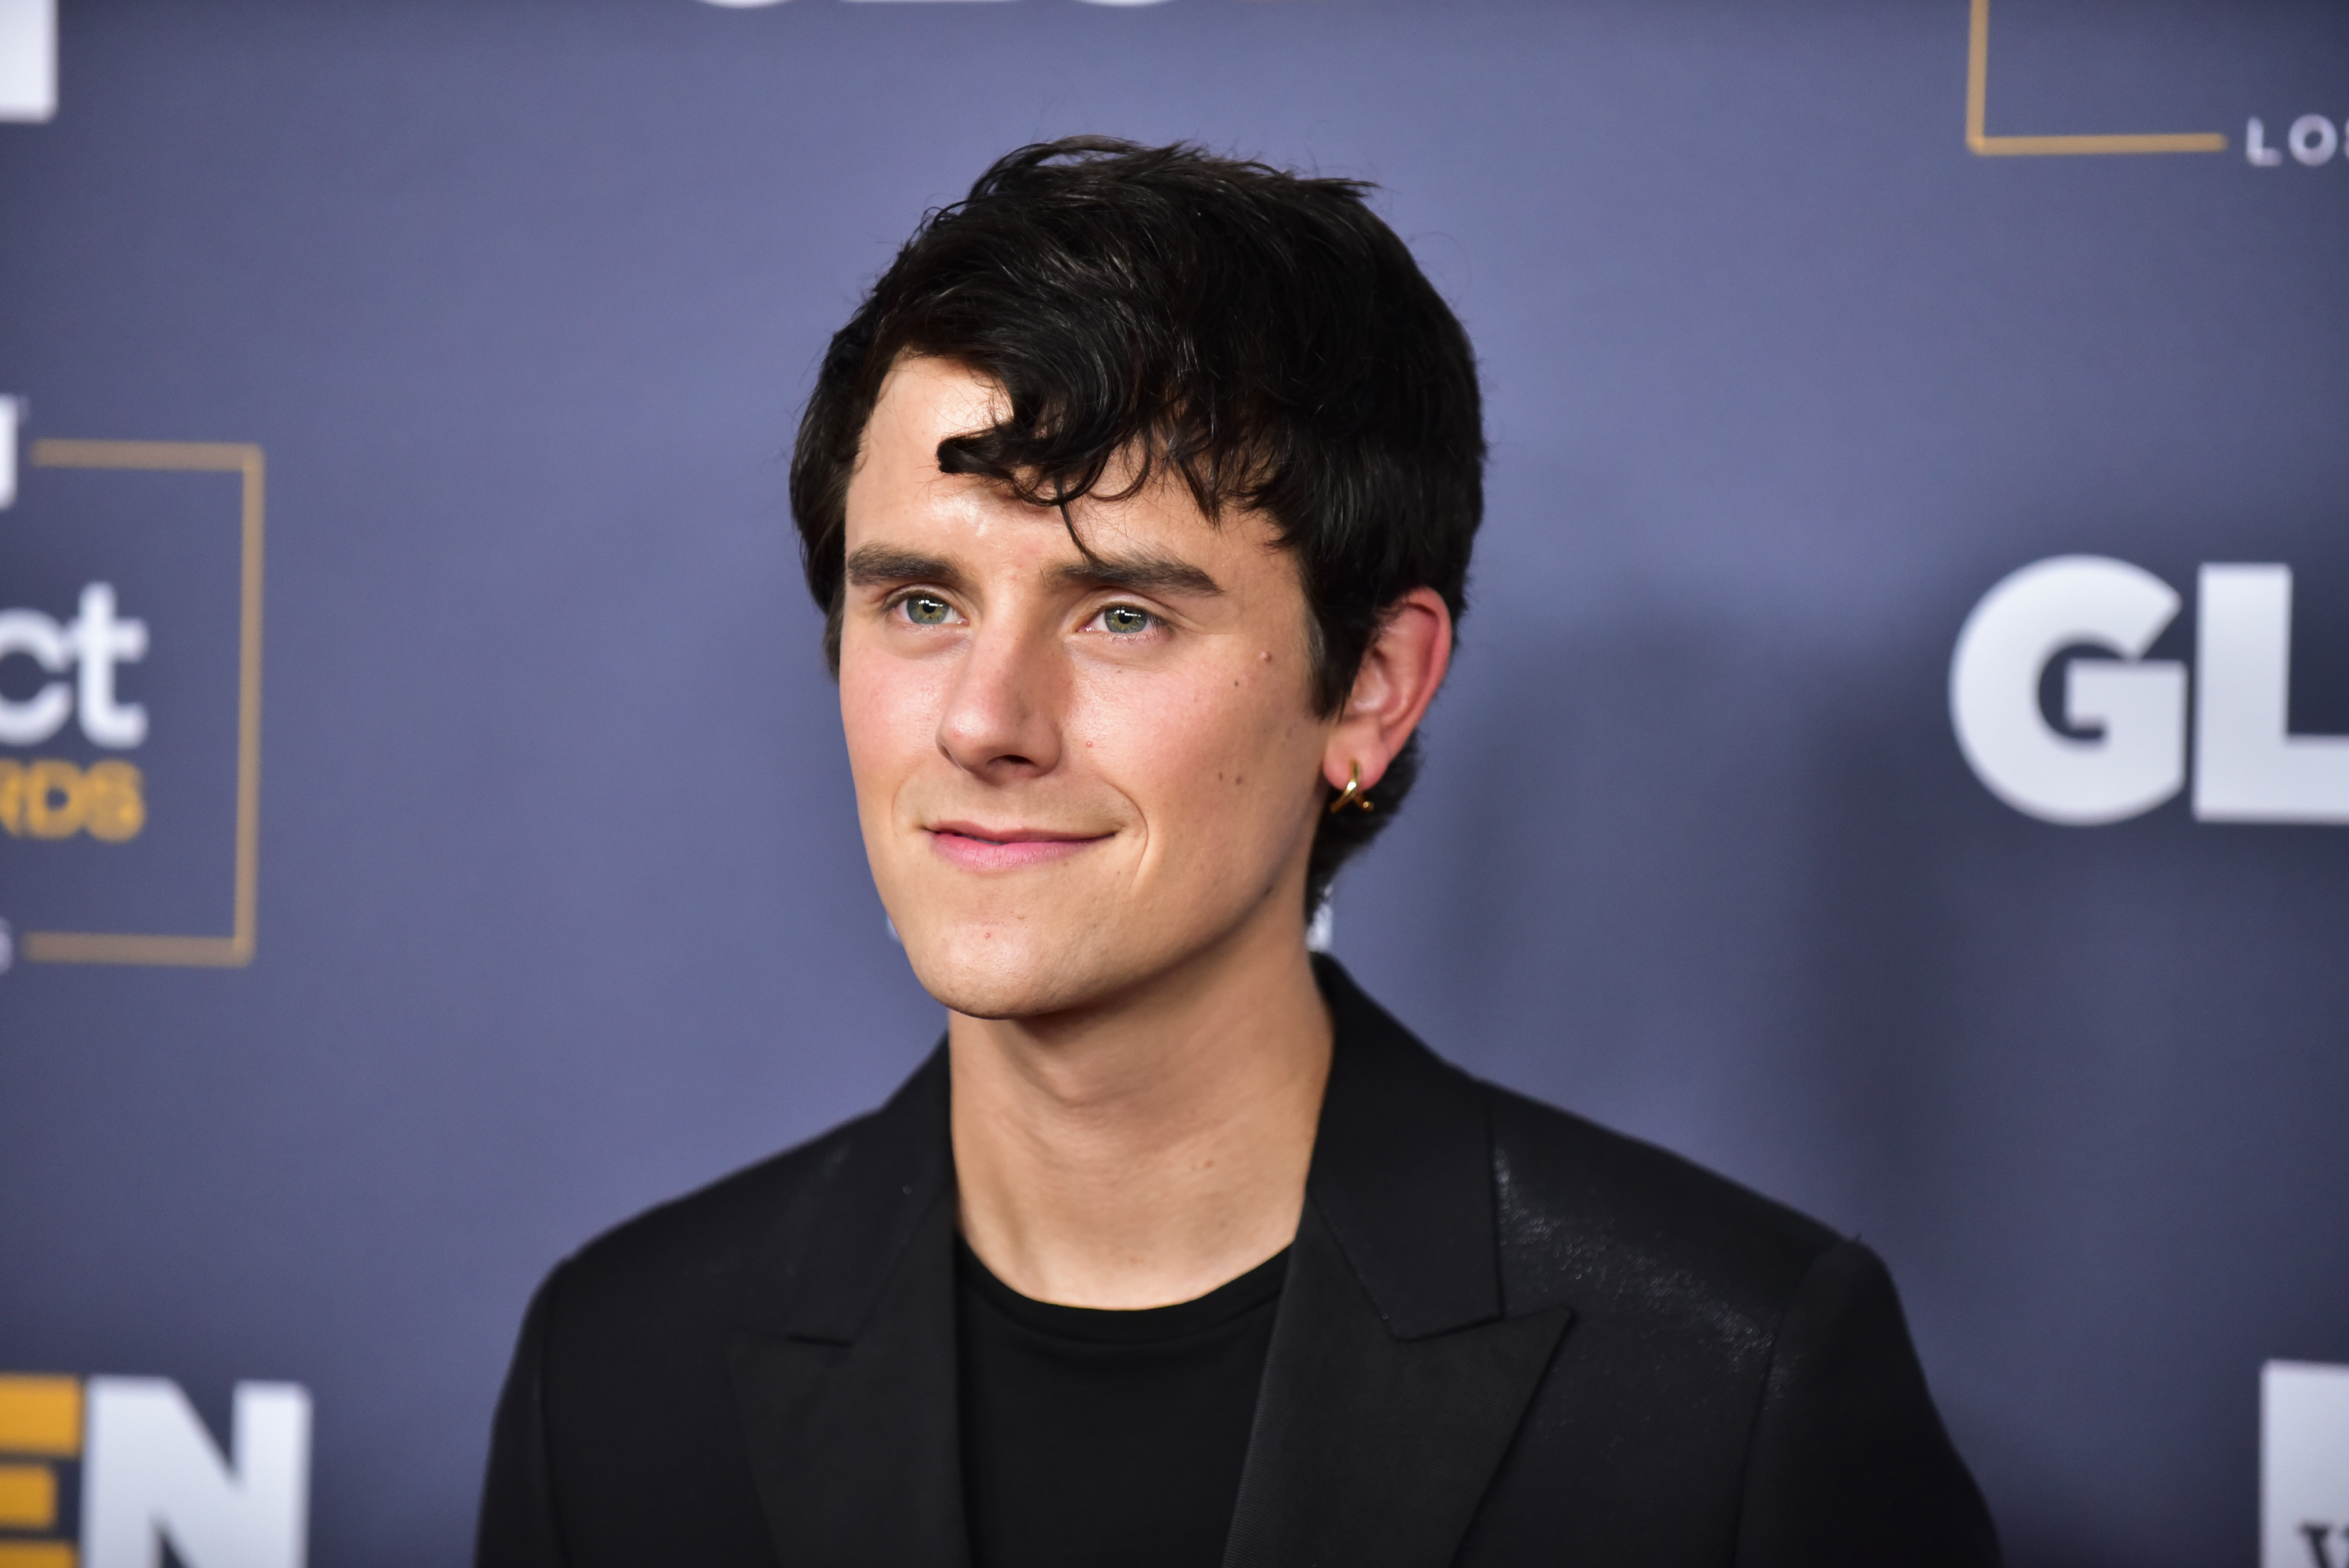 Connor Franta attends the 2019 GLSEN Respect Awards at the Beverly Wilshire Four Seasons Hotel, on October 25, 2019, in Beverly Hills, California. | Source: Getty Images